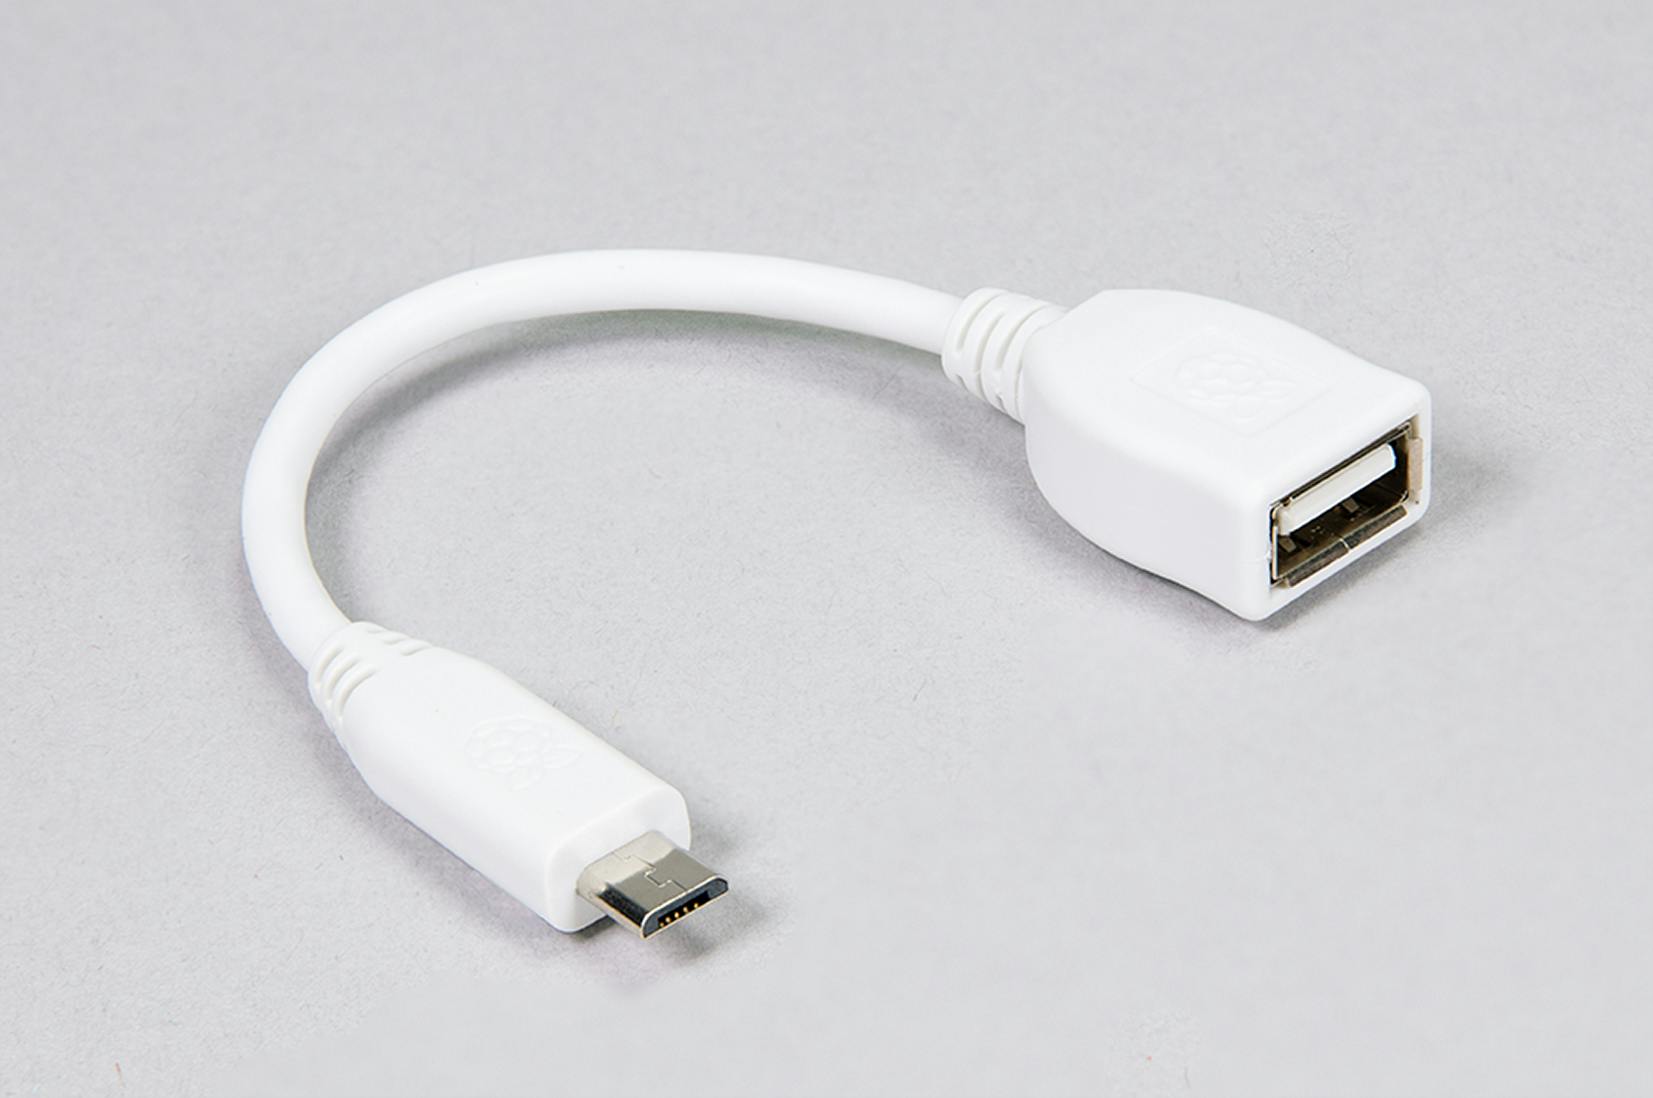 Raap bladeren op verkeer magneet Buy a Micro USB/Male to USB A/Female cable – Raspberry Pi